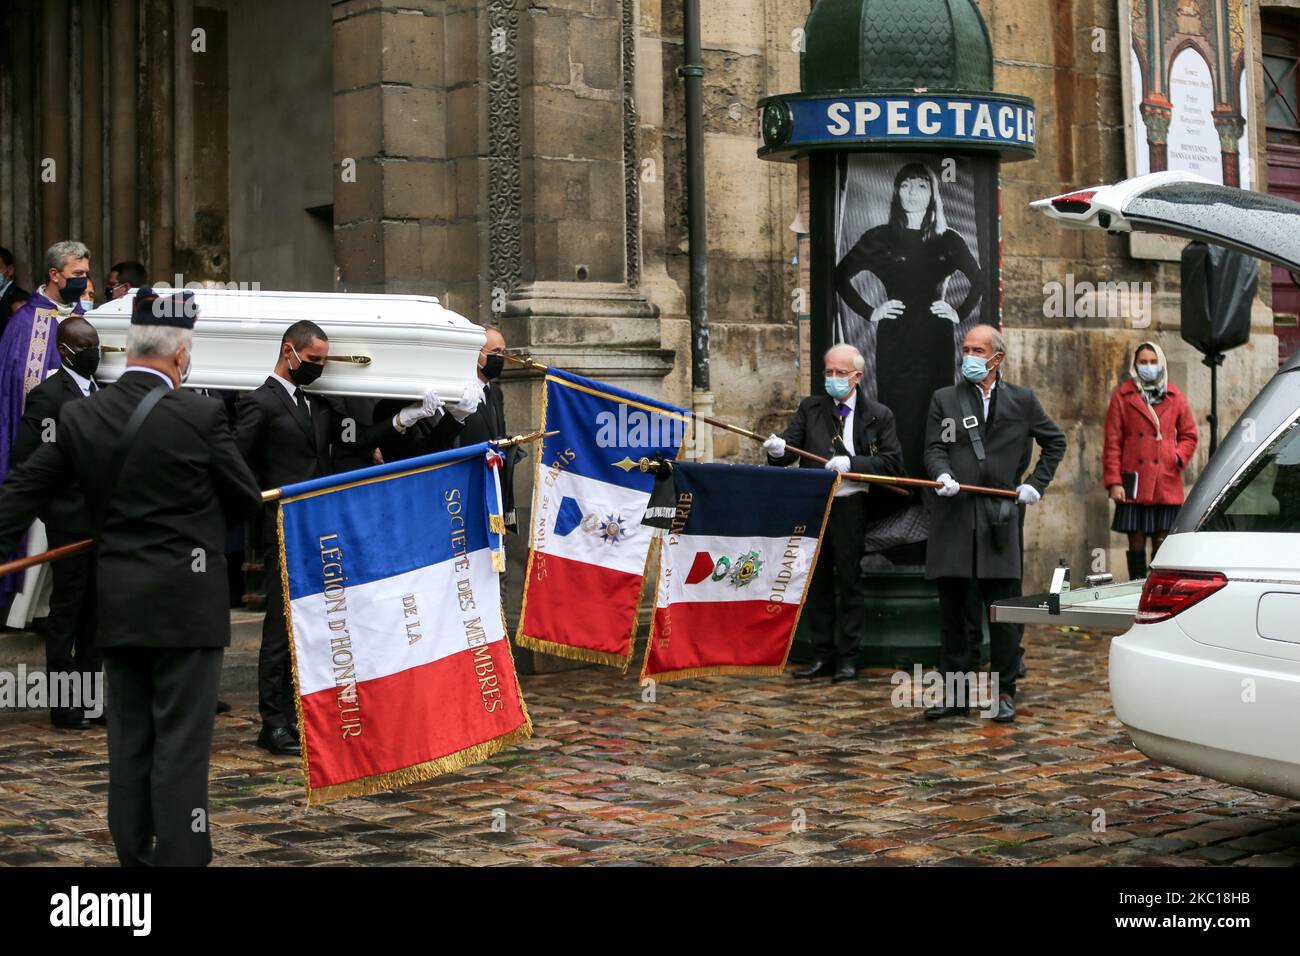 Pallbearers carry out the coffin of French singer Juliette Greco during her funeral ceremony at the Saint-Germain-des-Pres church in Paris, on October 5, 2020. Legendary French singer Juliette Greco, whose career spanned over half a century, died aged 93, on 23 September 23. In the background, a mock-colonne Morris advertising column displays a poster of French singer Juliette Greco. (Photo by Michel Stoupak/NurPhoto) Stock Photo